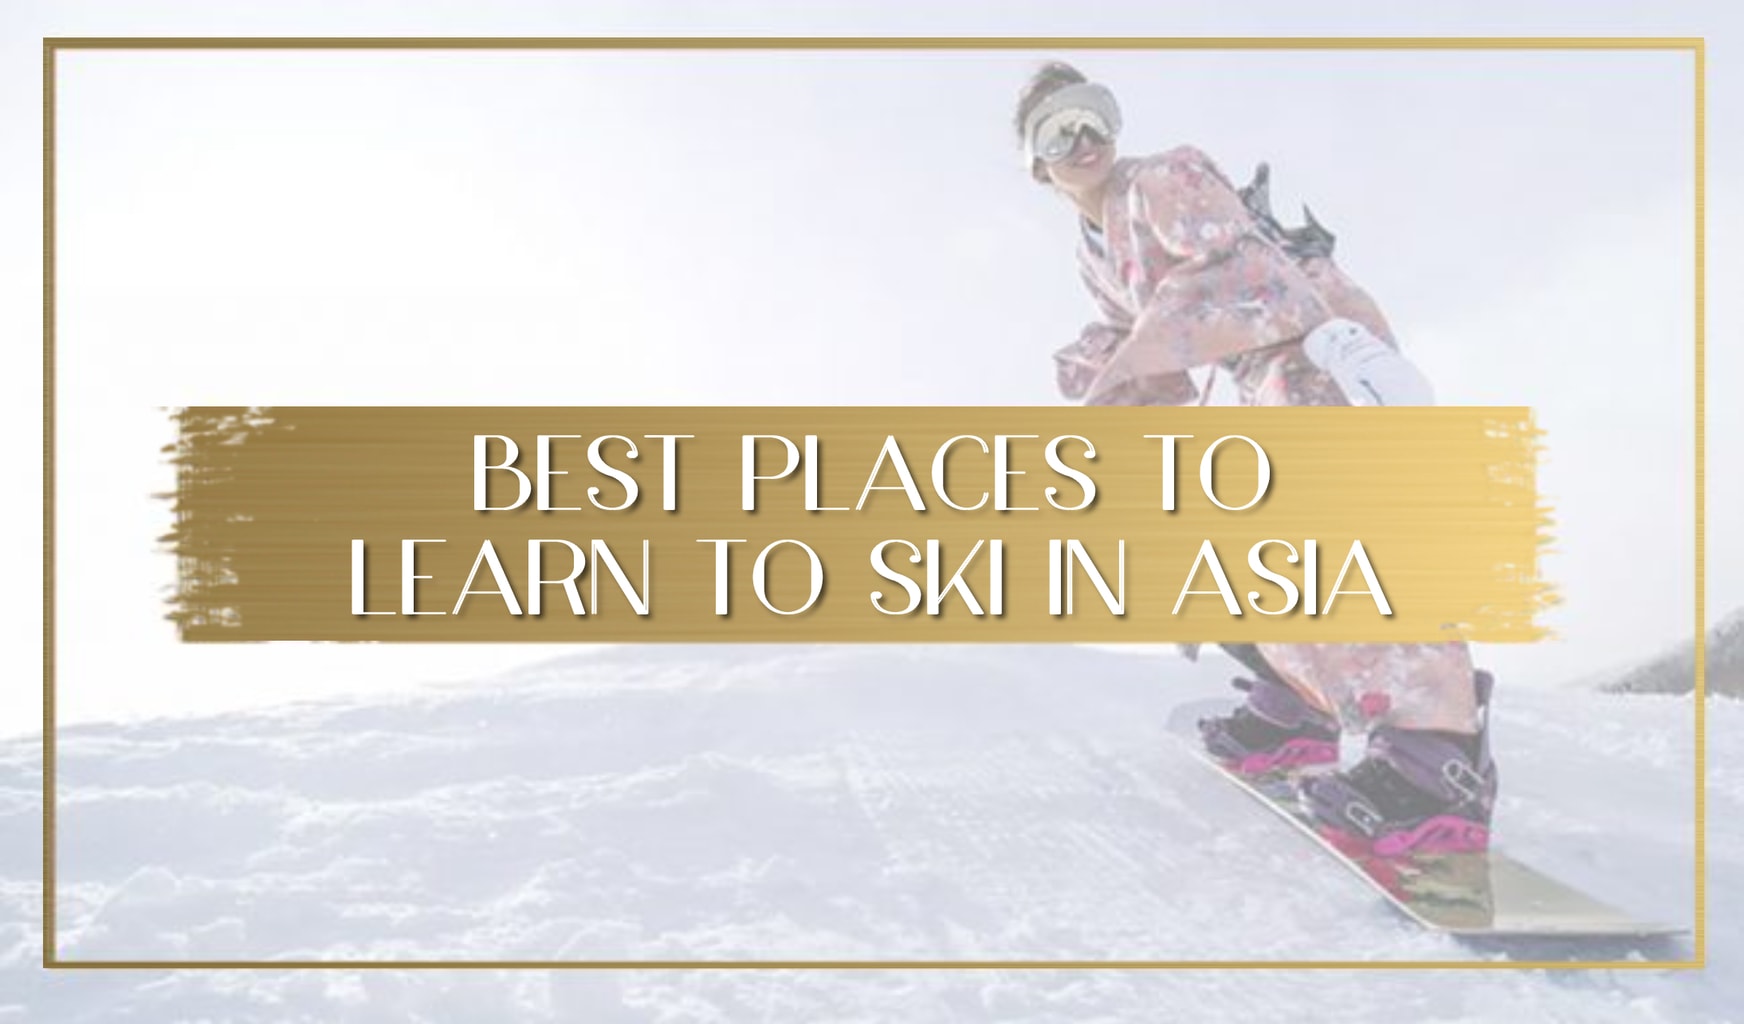 Best places to learn to ski in Asia main